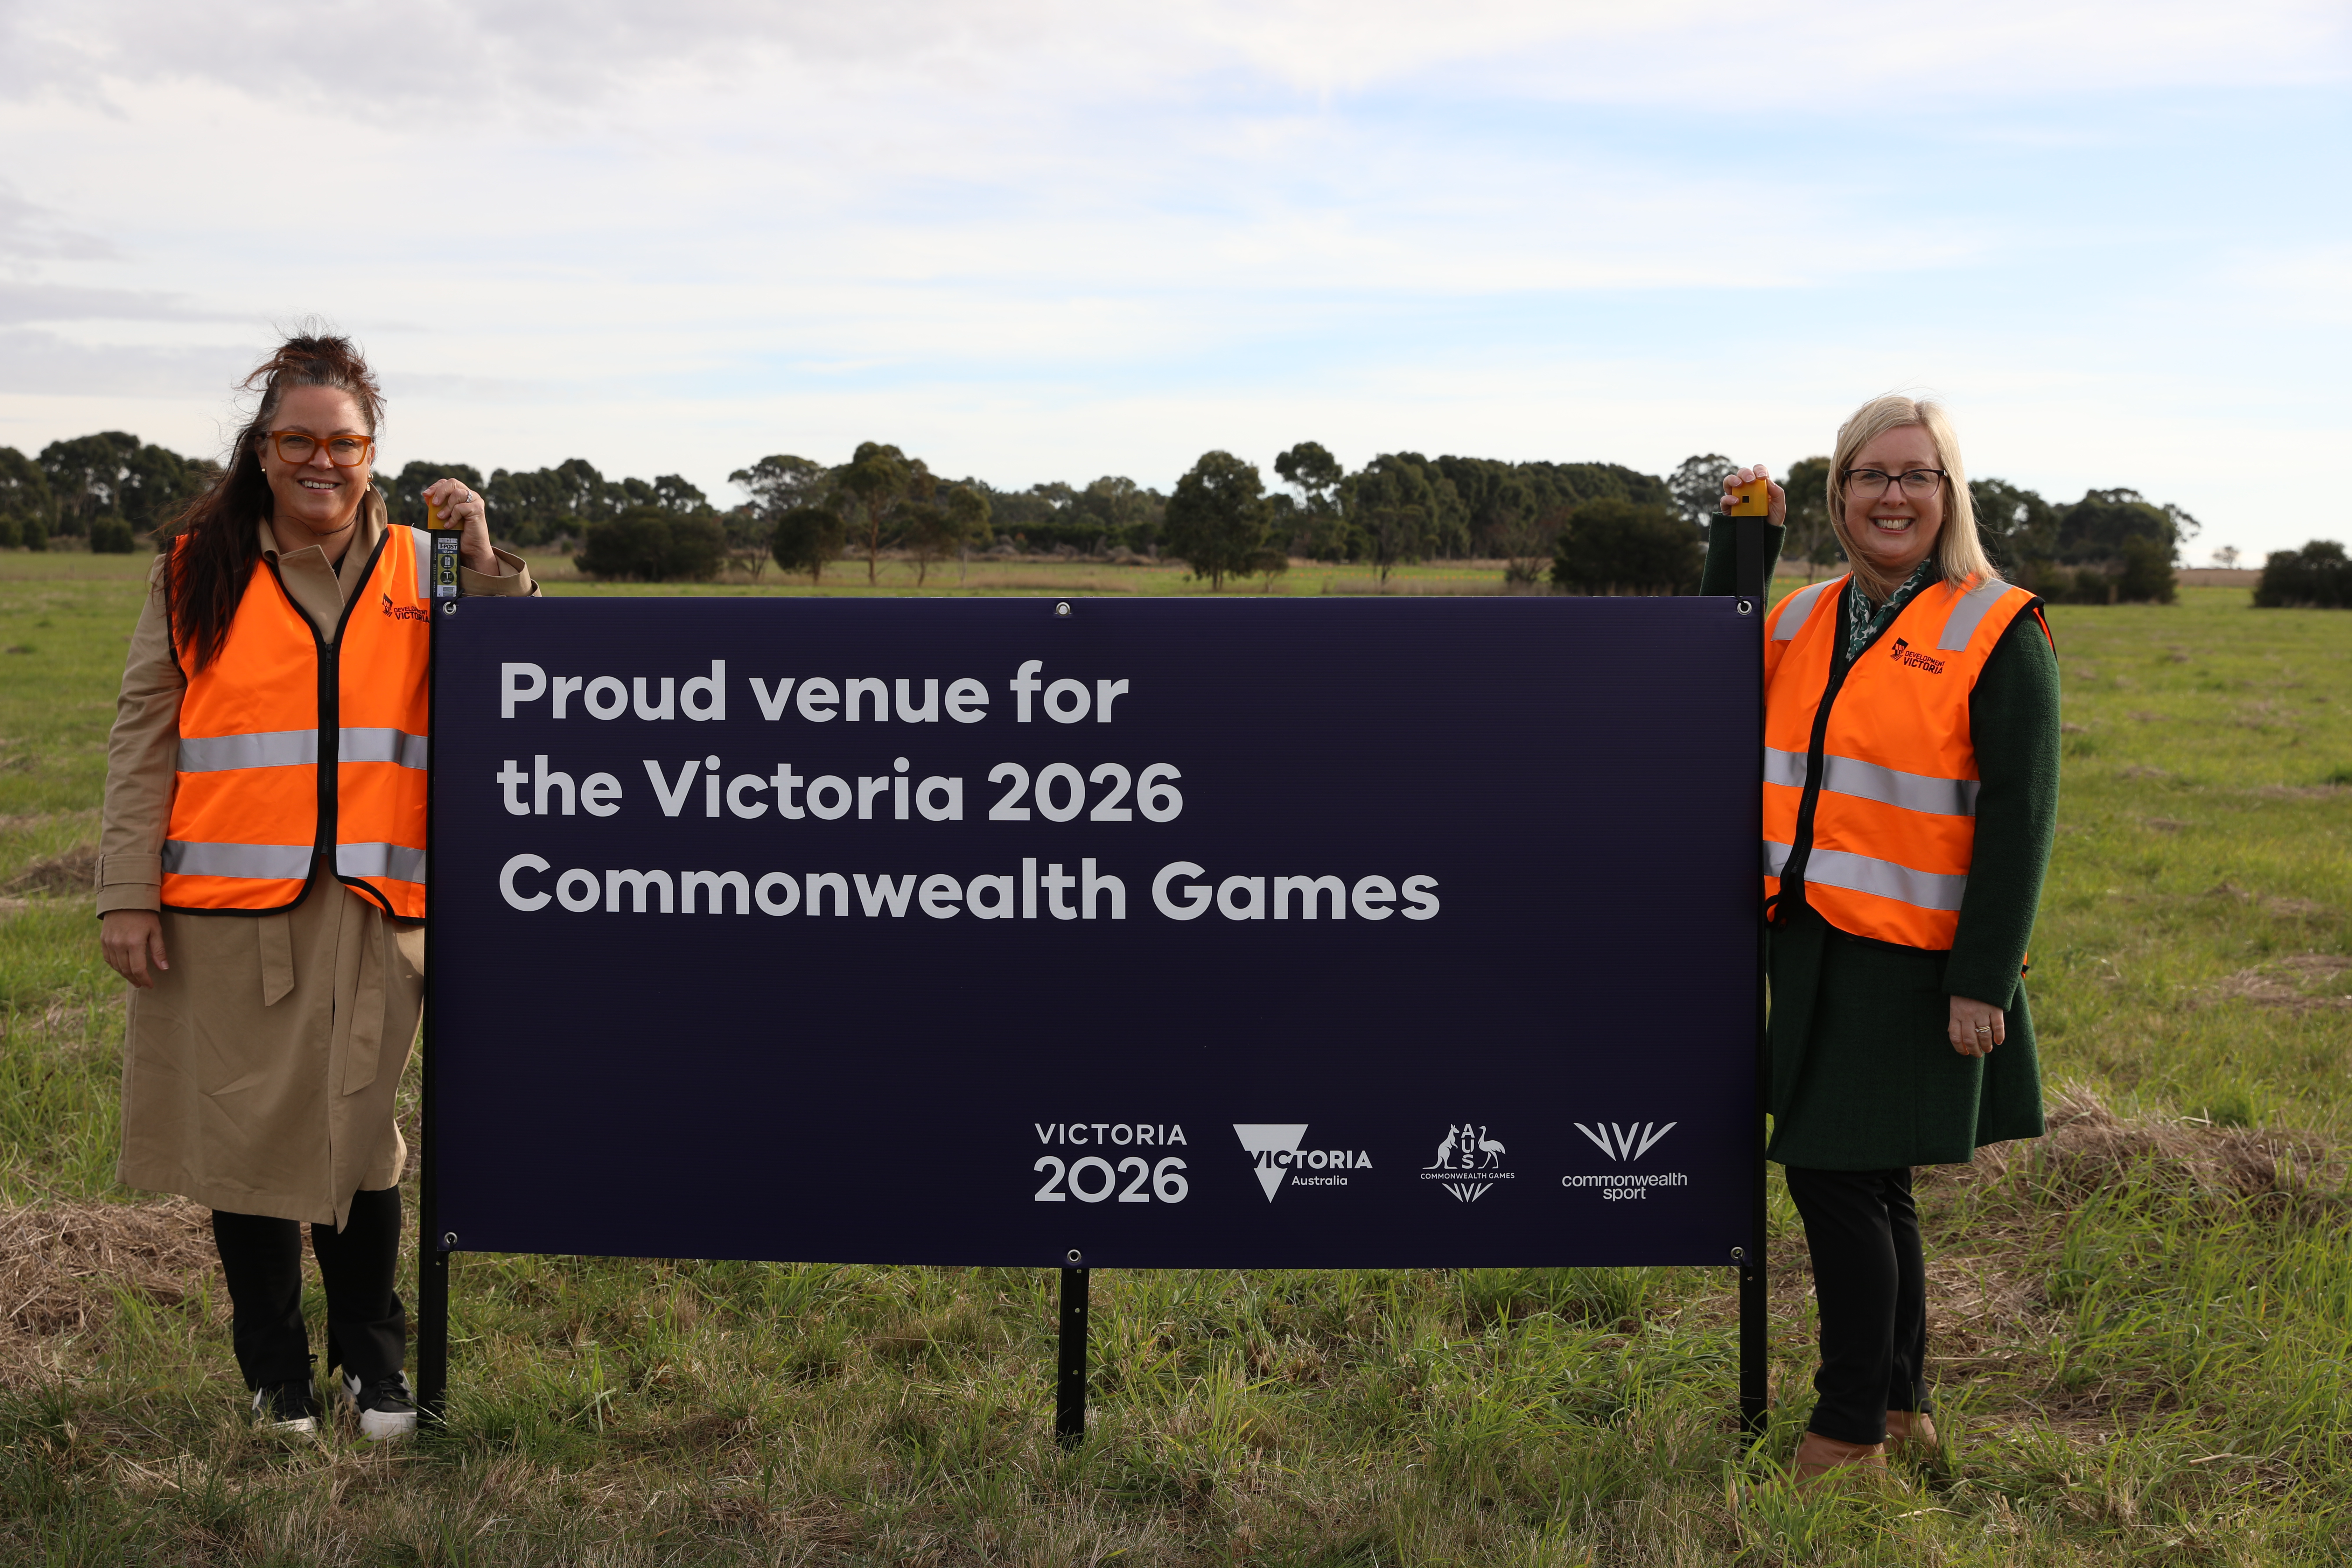 Two white women smiling to camera standing with a sign that says Proud venue for the Victoria 2026 Commonweath Games.